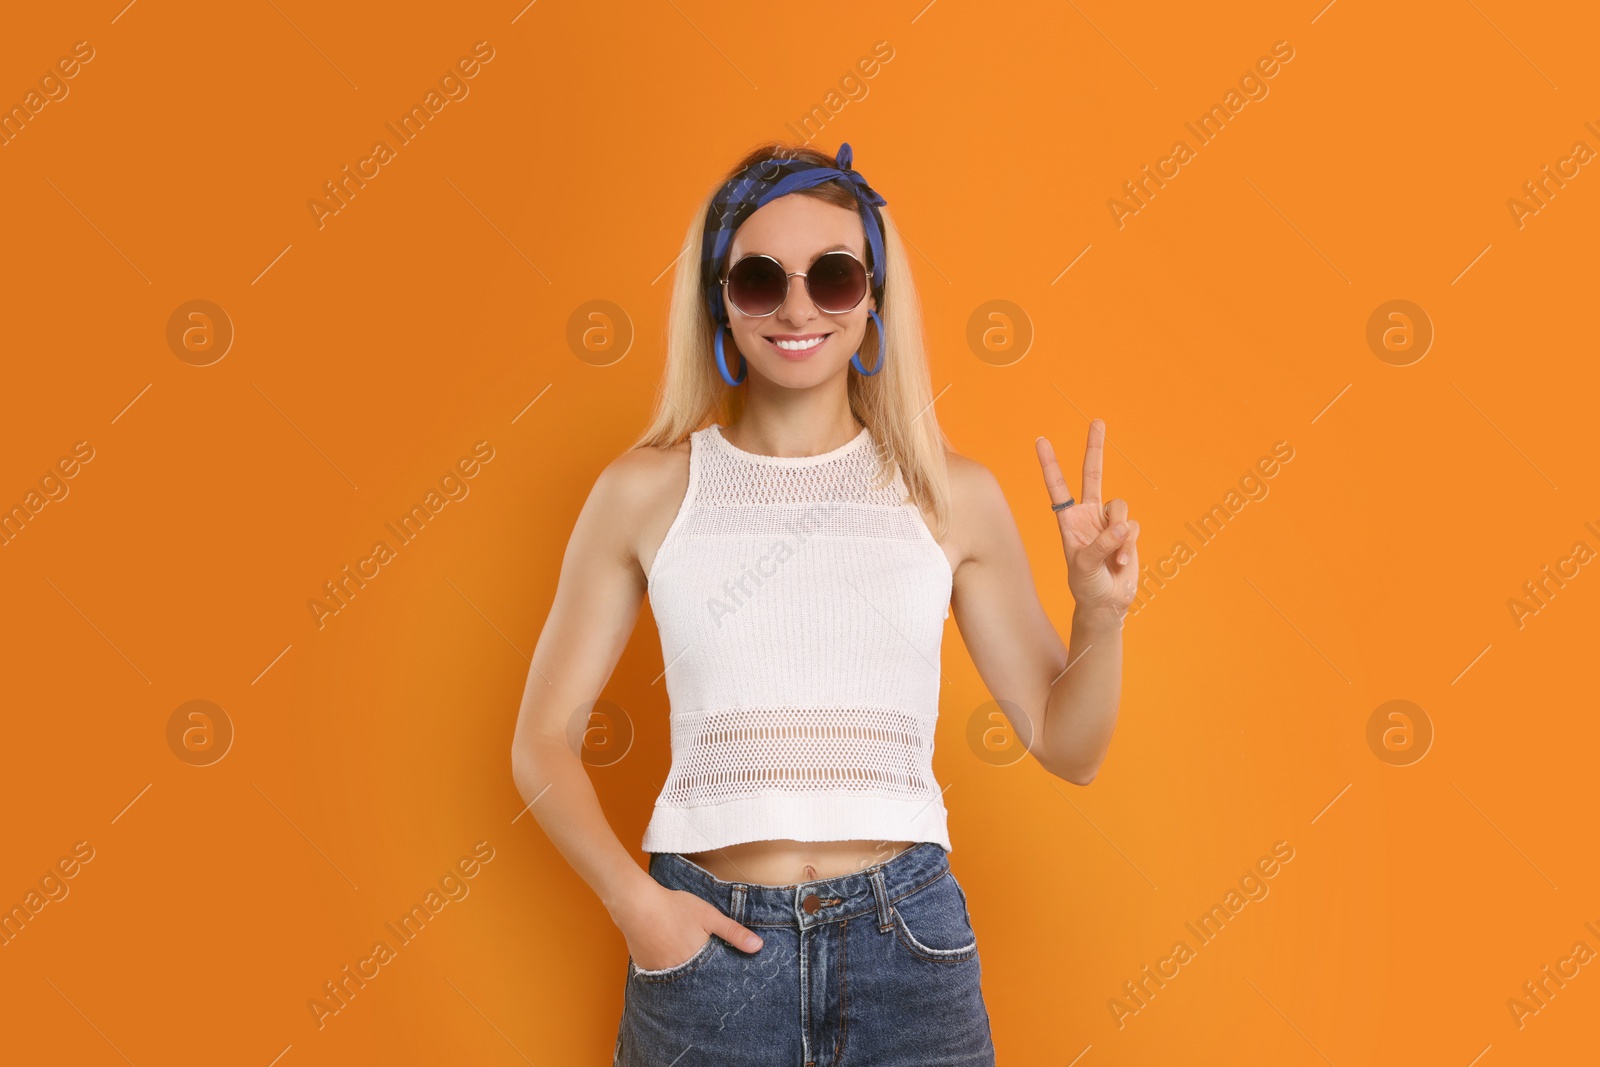 Photo of Smiling hippie woman showing peace sign on orange background